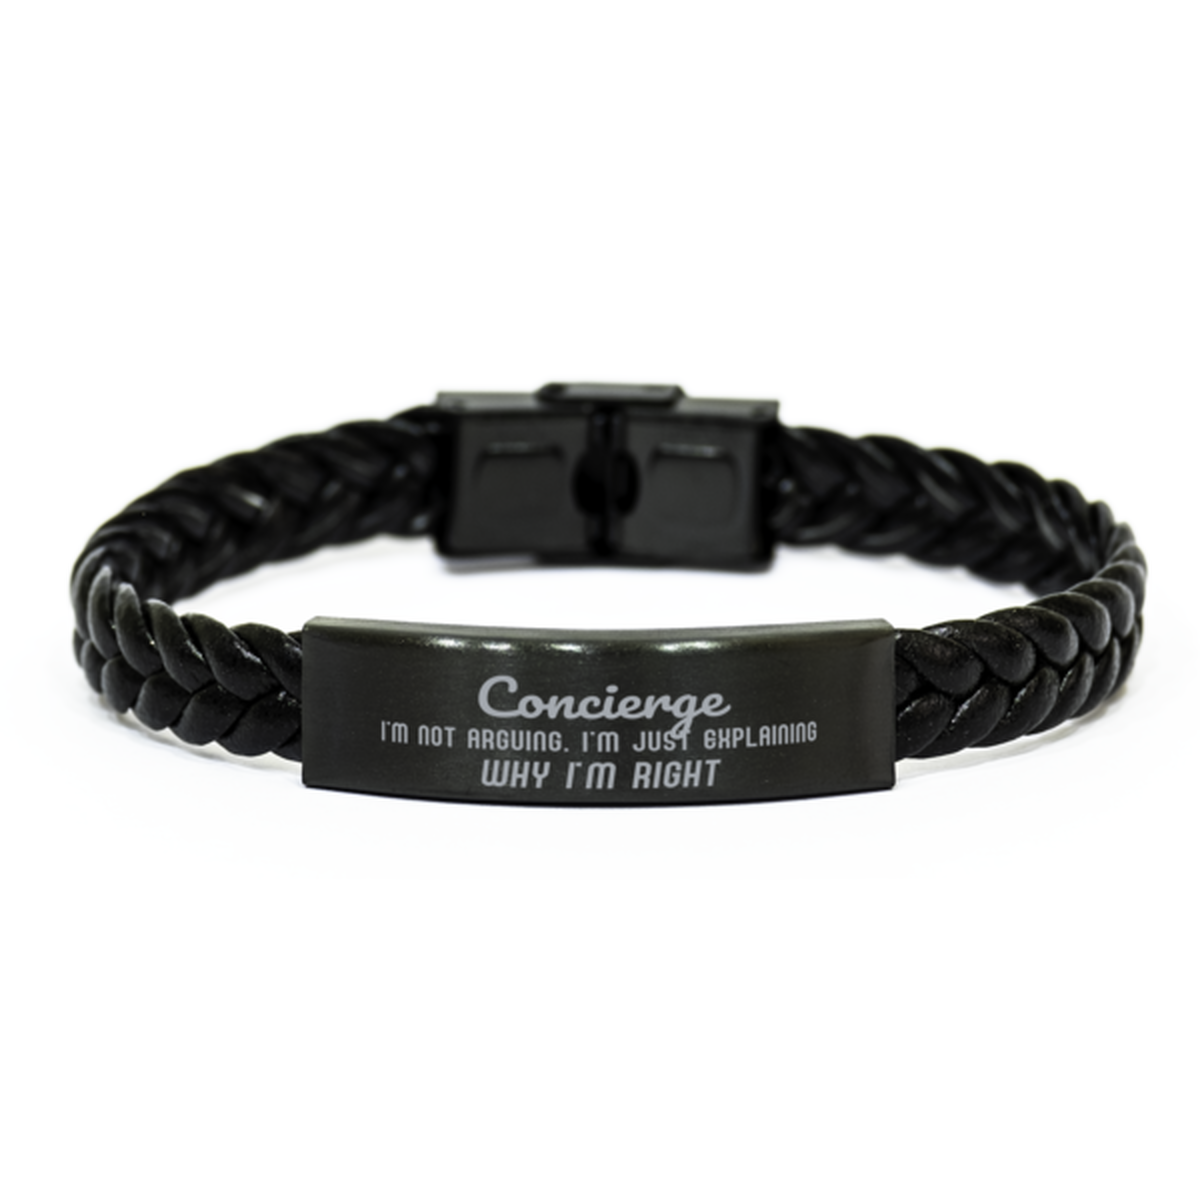 Concierge I'm not Arguing. I'm Just Explaining Why I'm RIGHT Braided Leather Bracelet, Graduation Birthday Christmas Concierge Gifts For Concierge Funny Saying Quote Present for Men Women Coworker